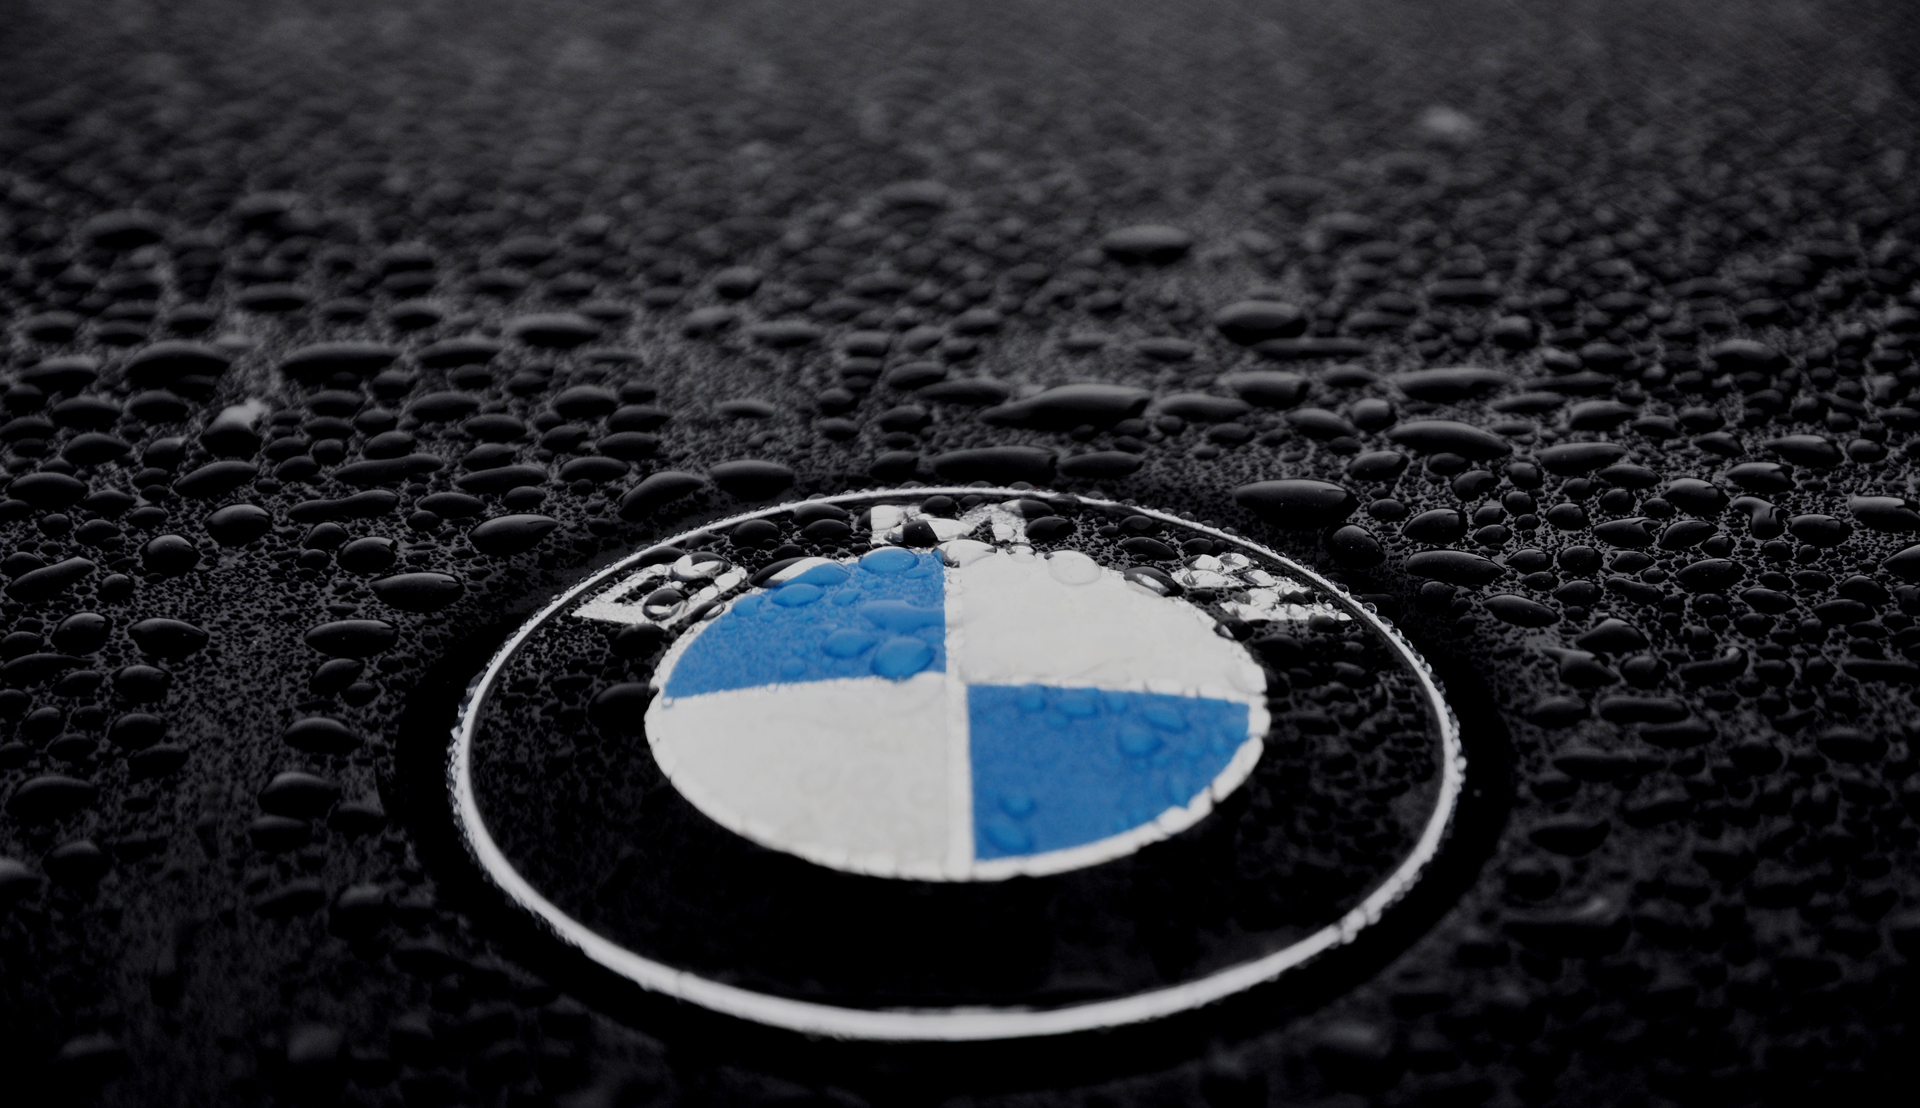 Bmw Logo Wallpapers Pictures Images HD Wallpapers Download Free Map Images Wallpaper [wallpaper376.blogspot.com]